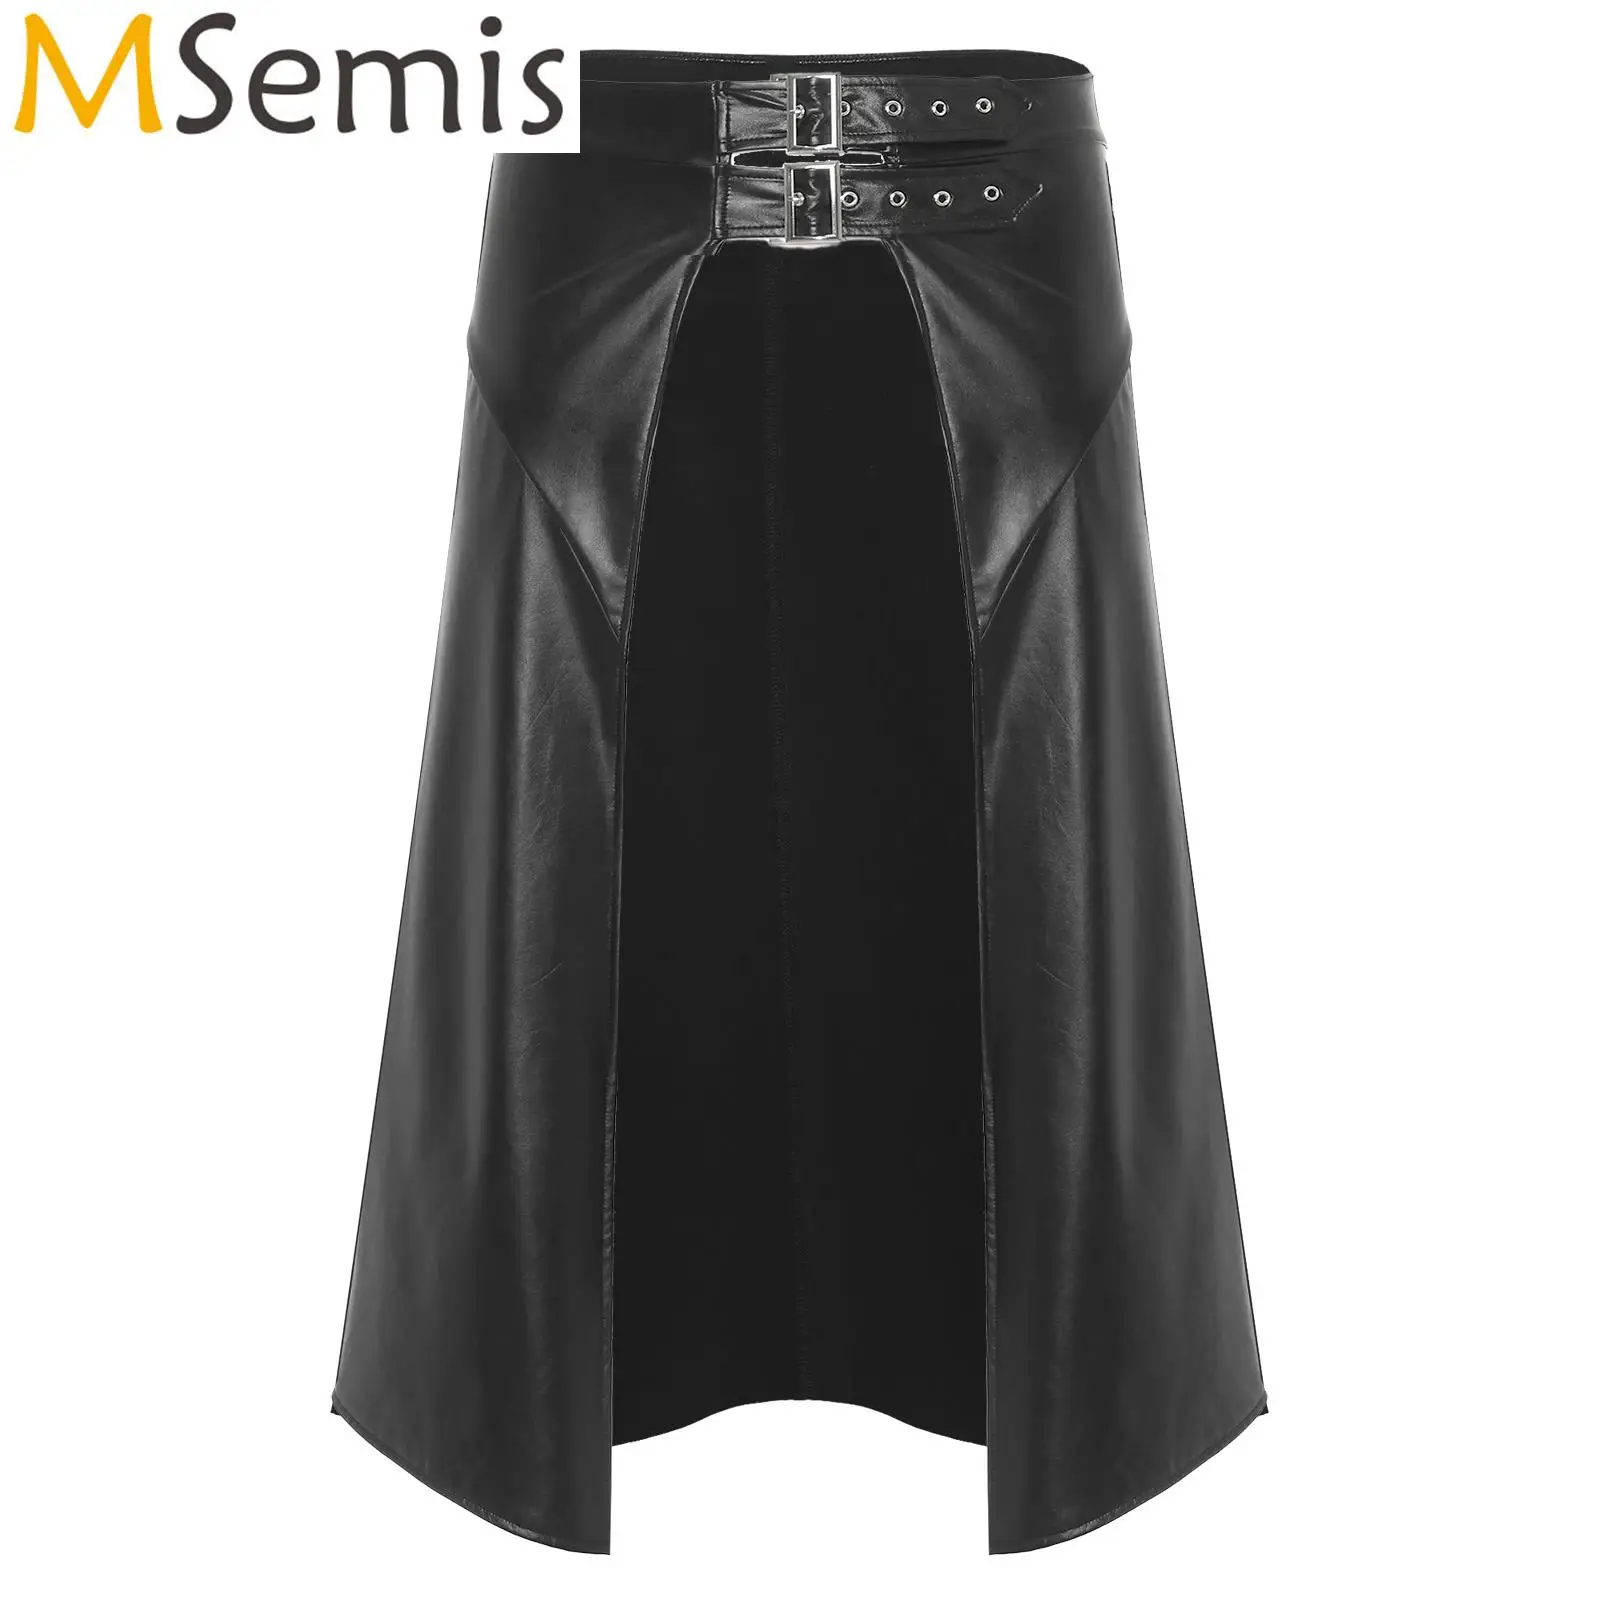 

Mens Open Front PU Leather Skirt Gothic Punk Clubwear Adjustable Buckle Asymmetrical Hem Skirts Rave Cosplay Festival Costume